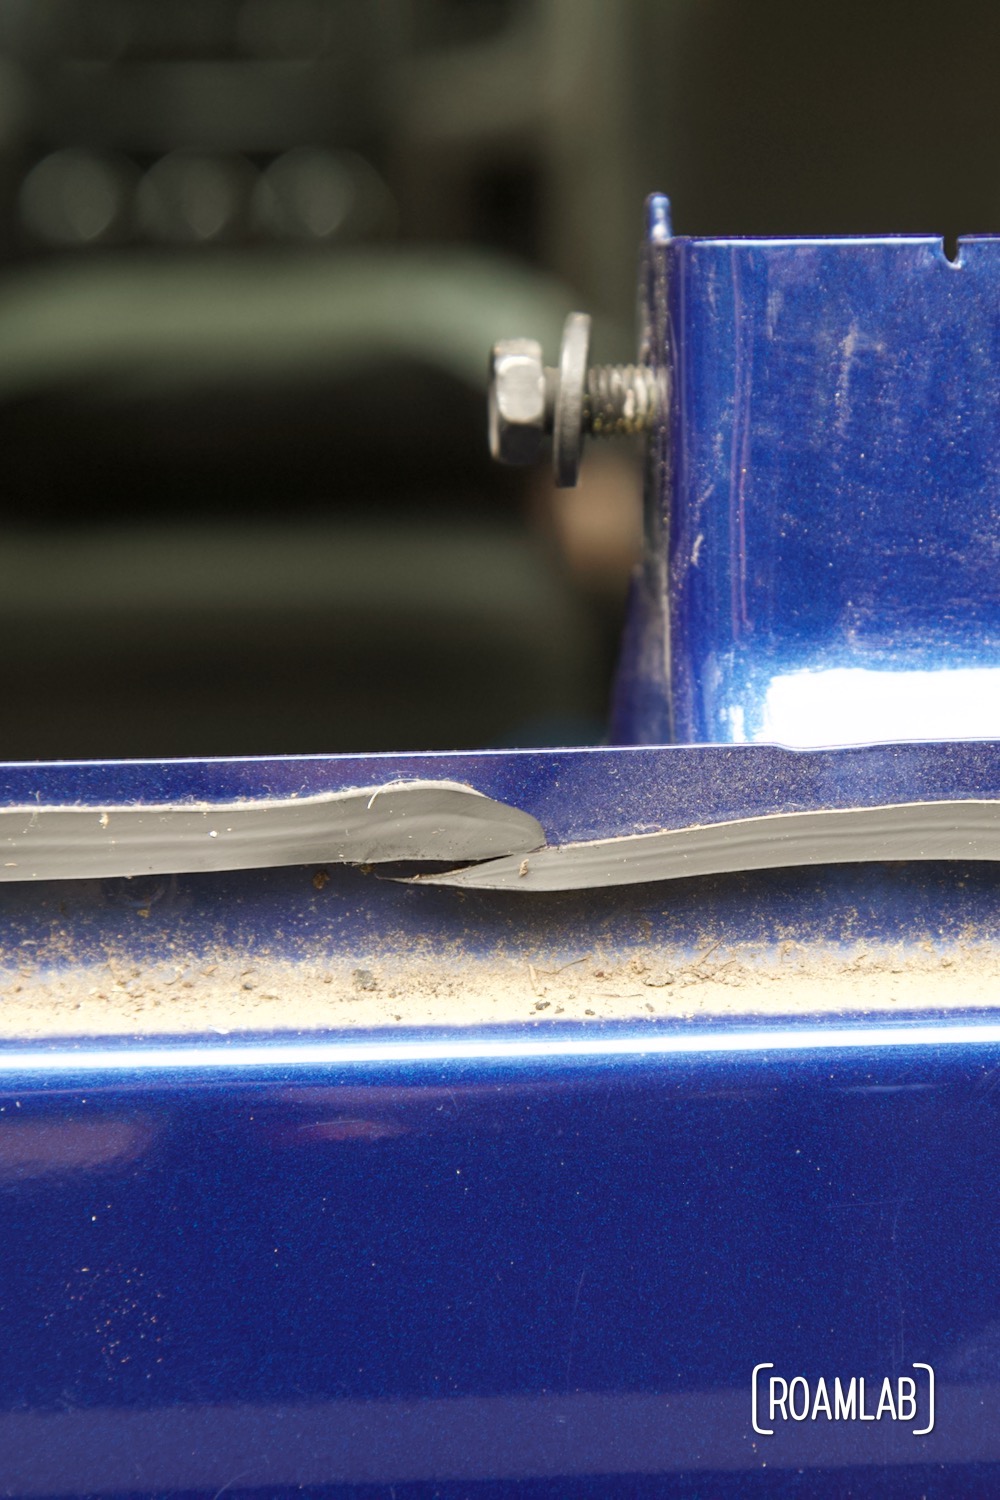 A flat but thick line of exposed urethane along the blue metal window frame of the rear truck cab.